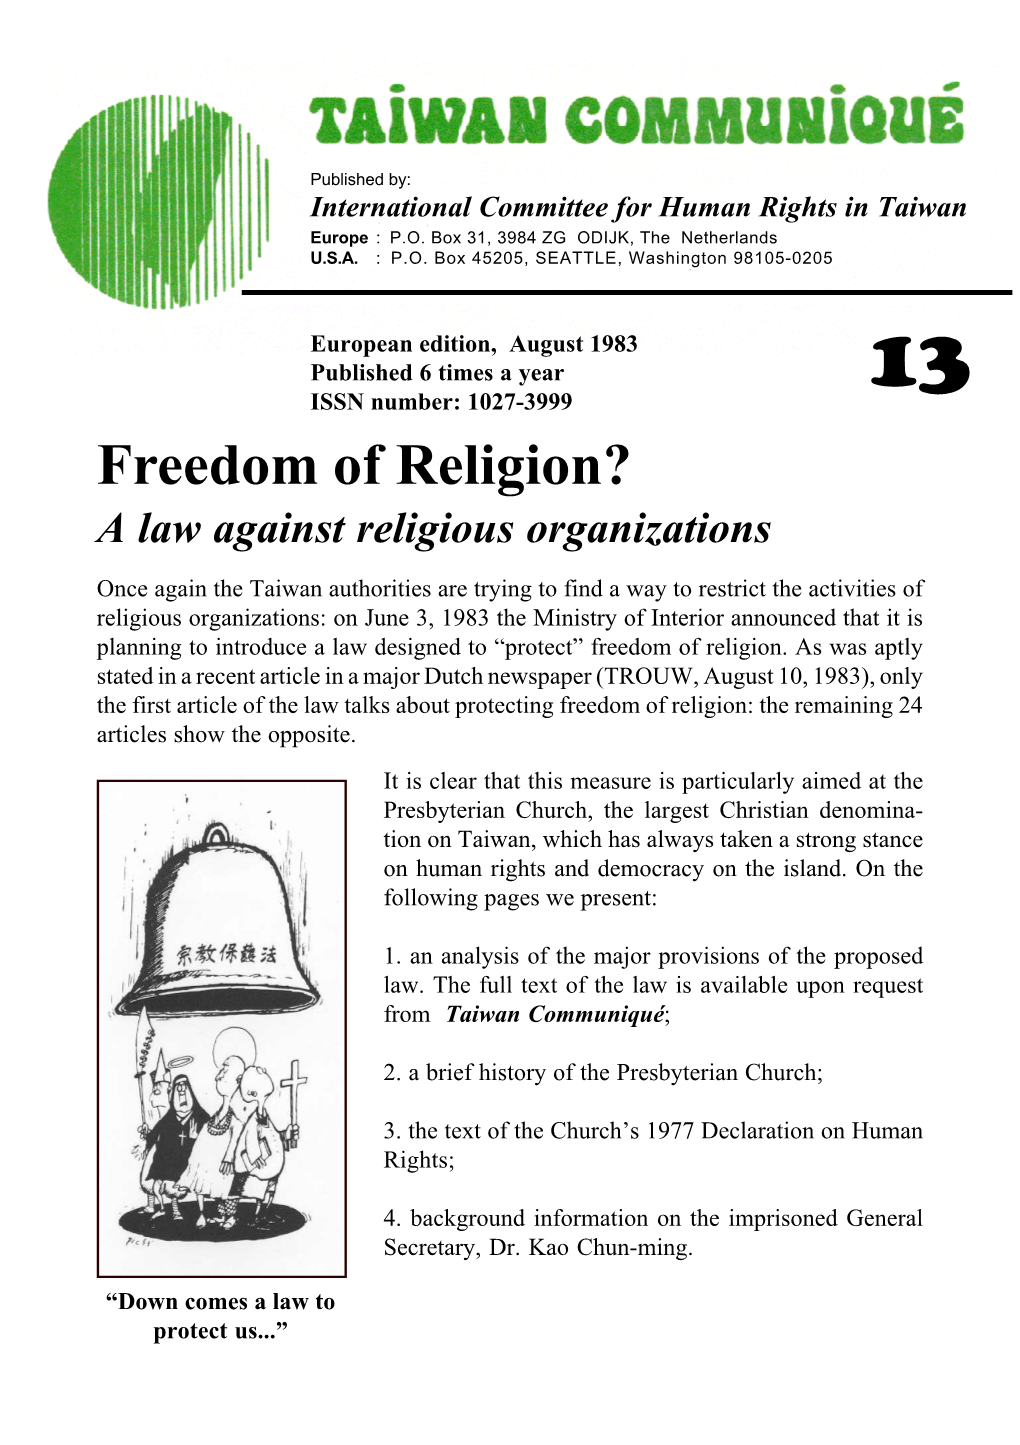 Freedom of Religion? a Law Against Religious Organizations